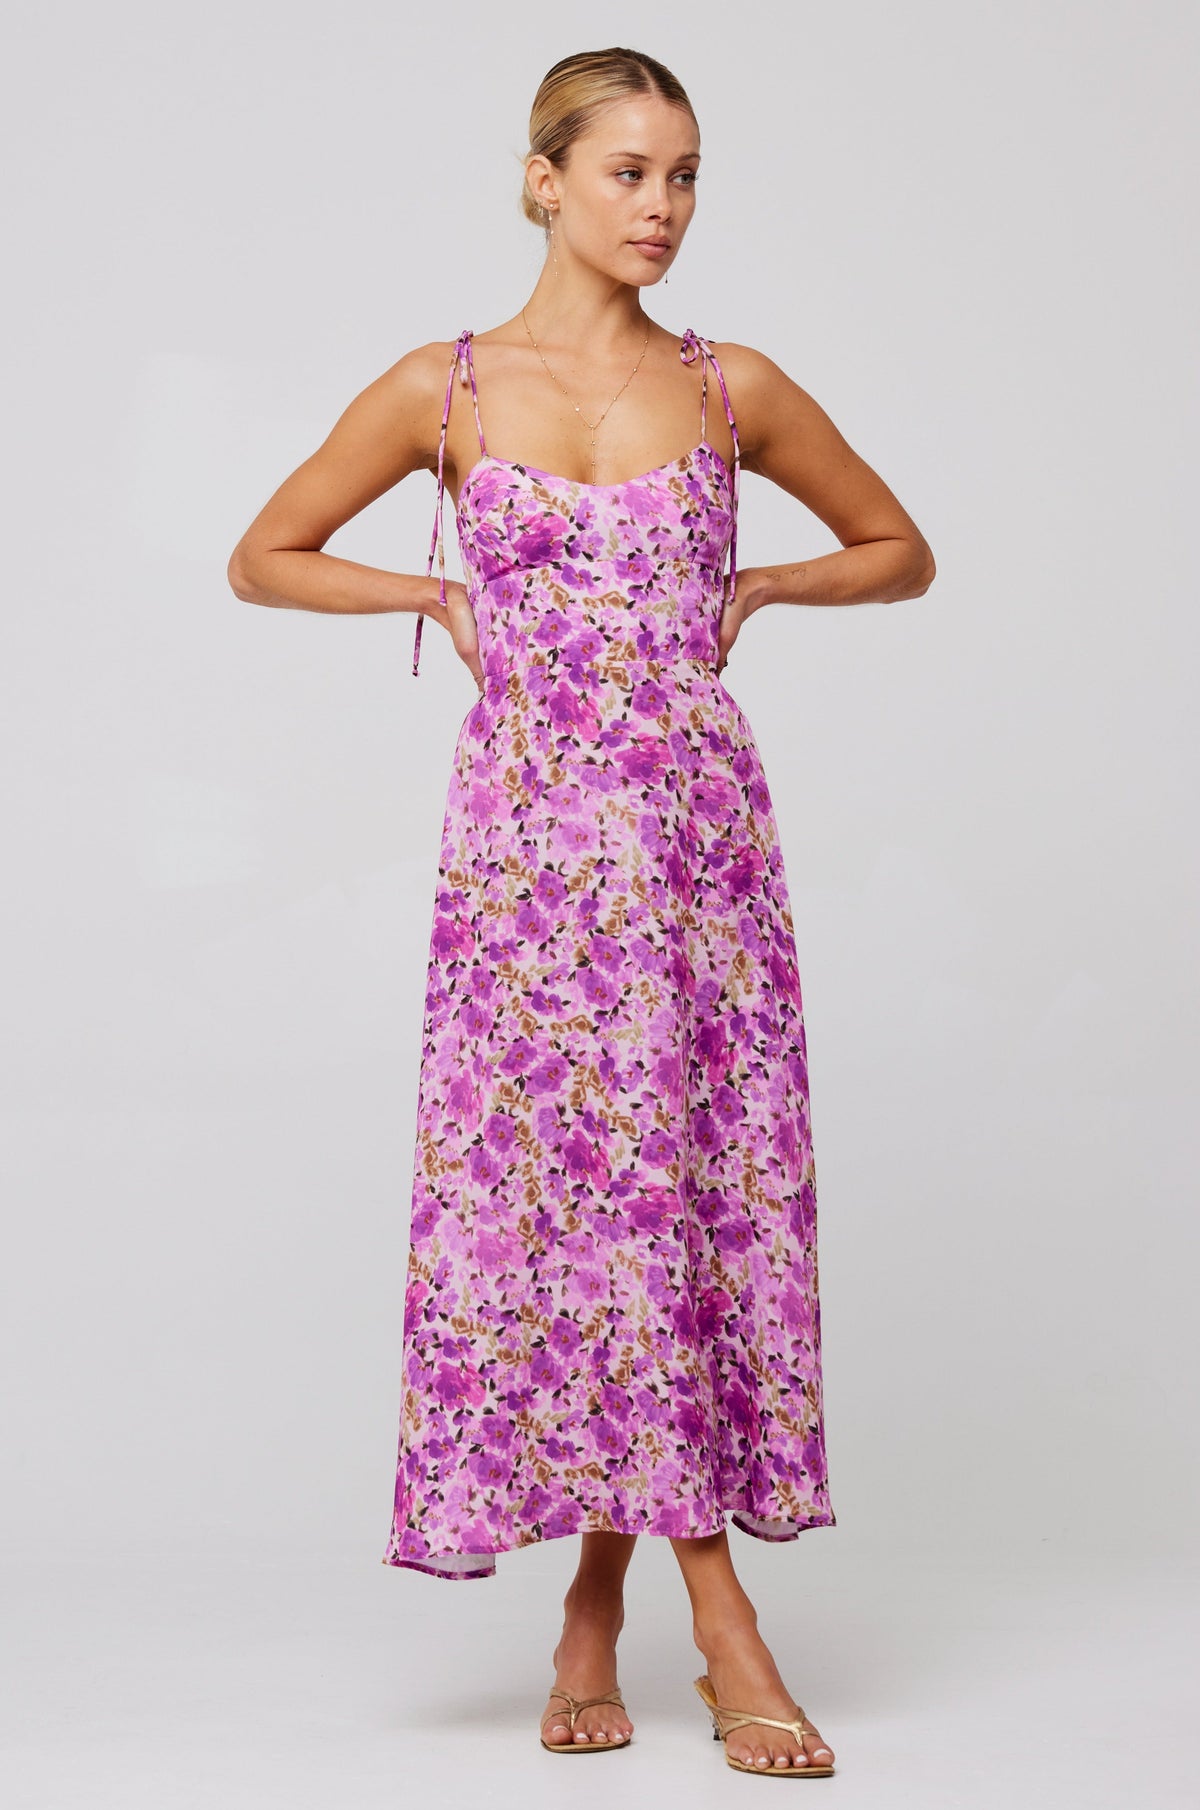 This is an image of Mandi Dress in Lilac - RESA featuring a model wearing the dress